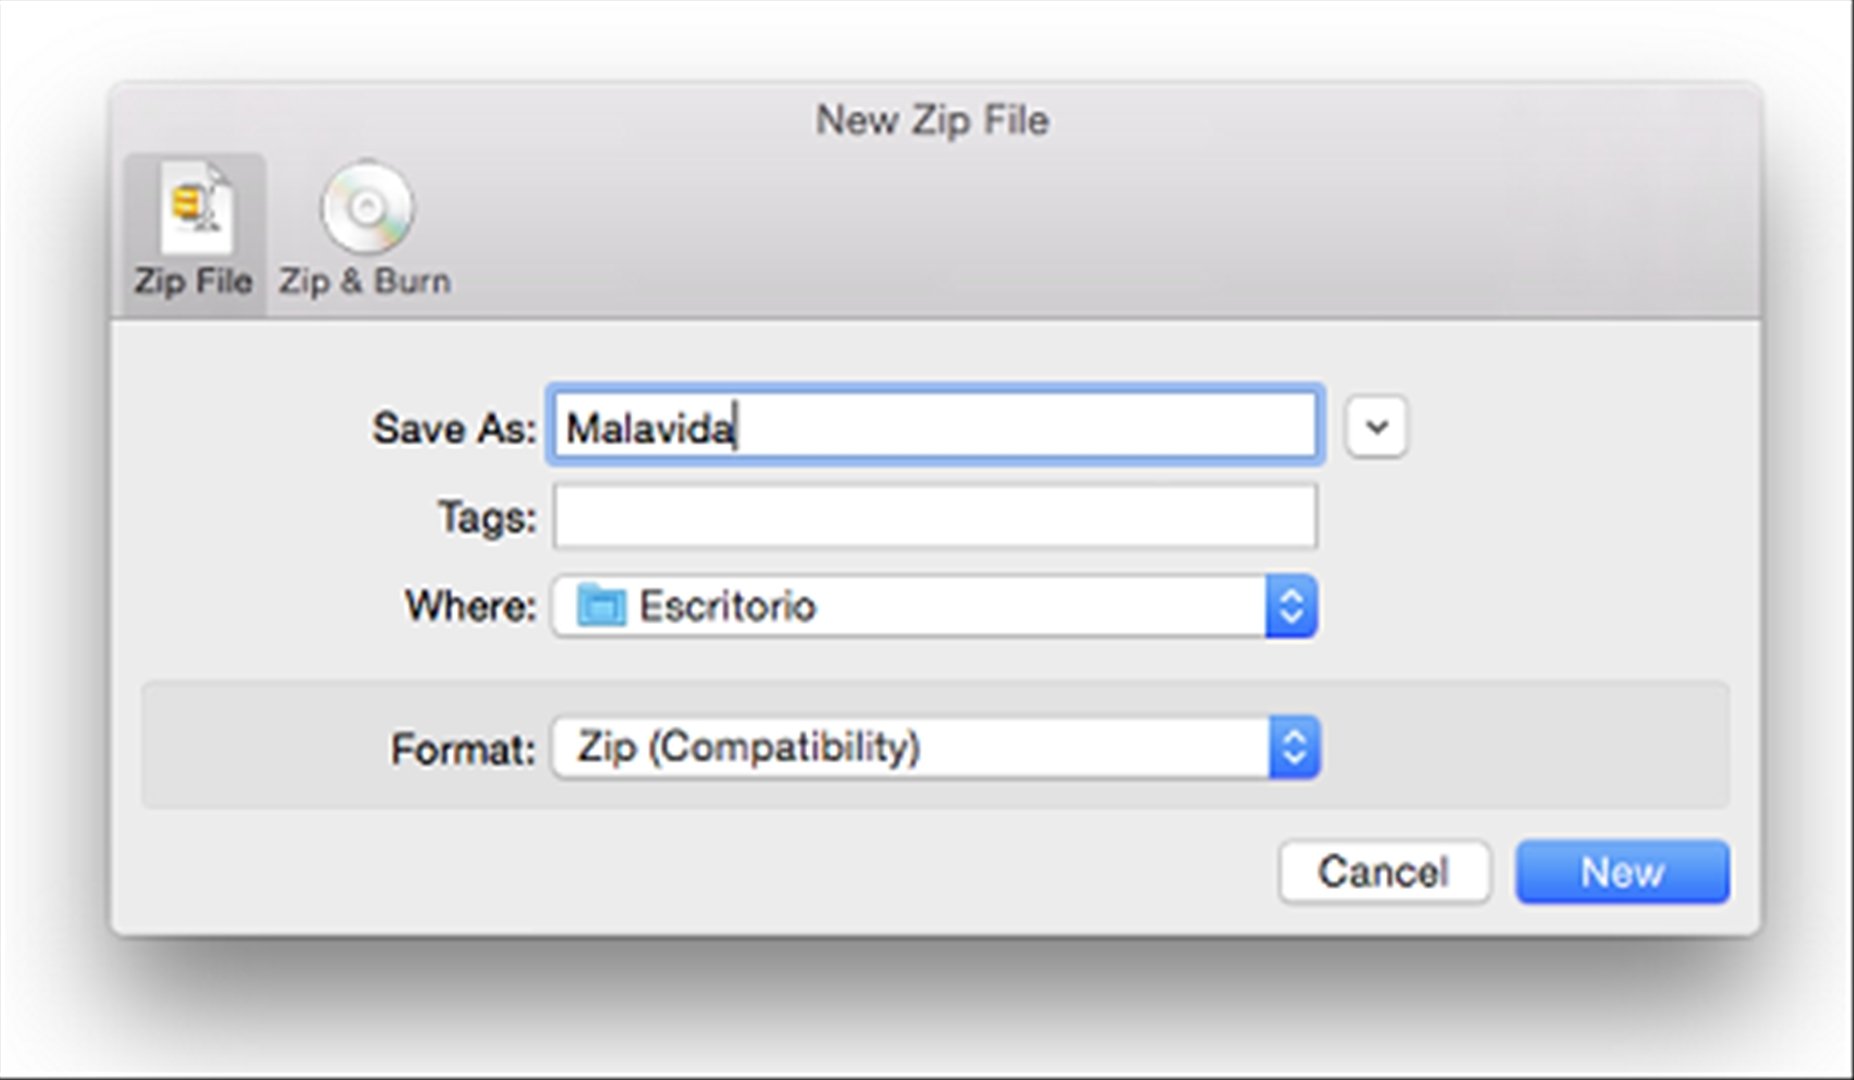 how to download winzip for mac free